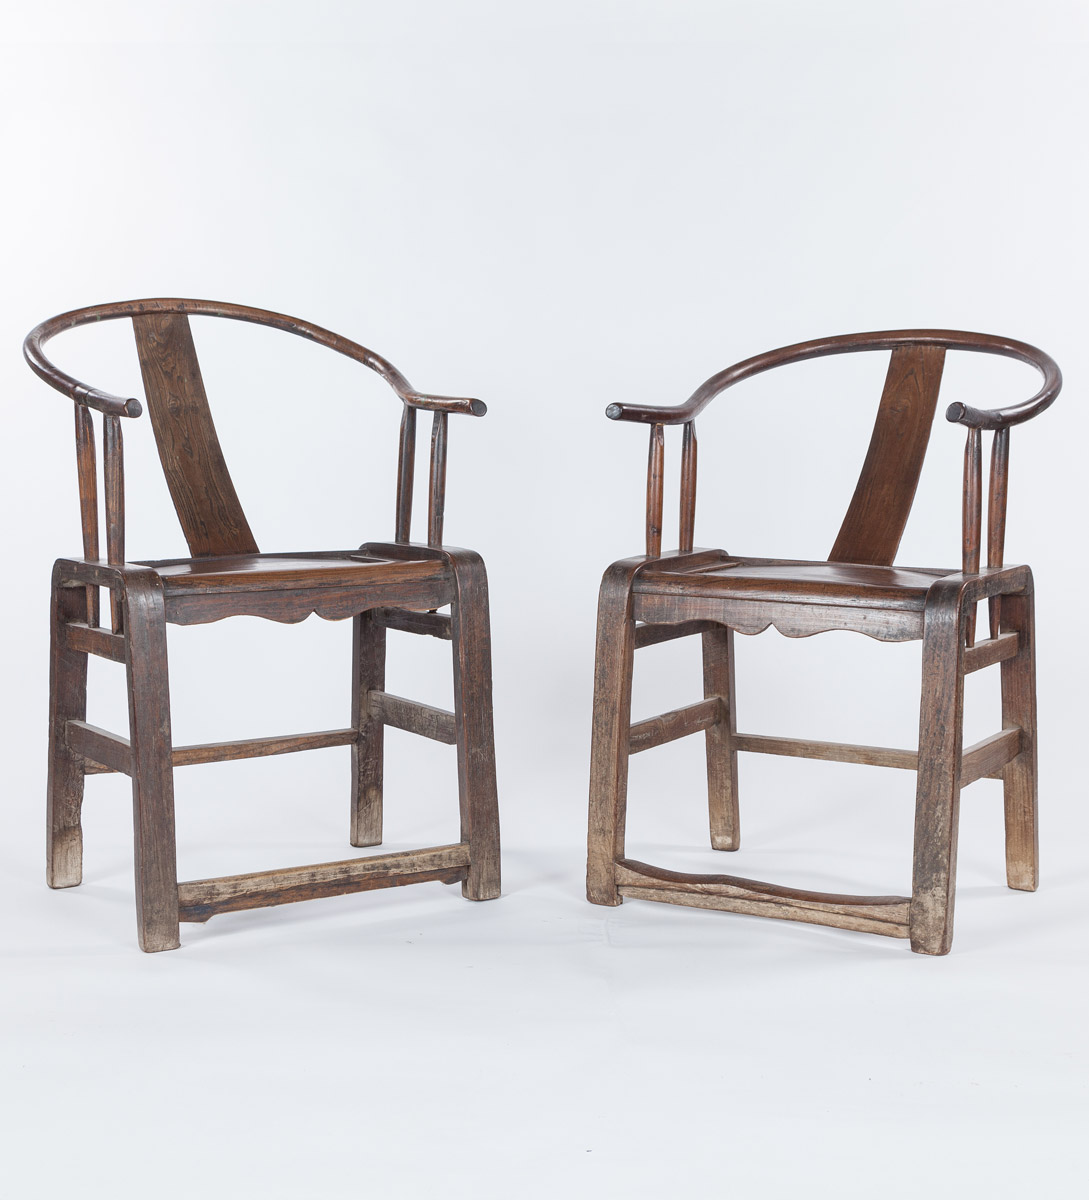 Chinese Horseshoe Chairs, Set of Two